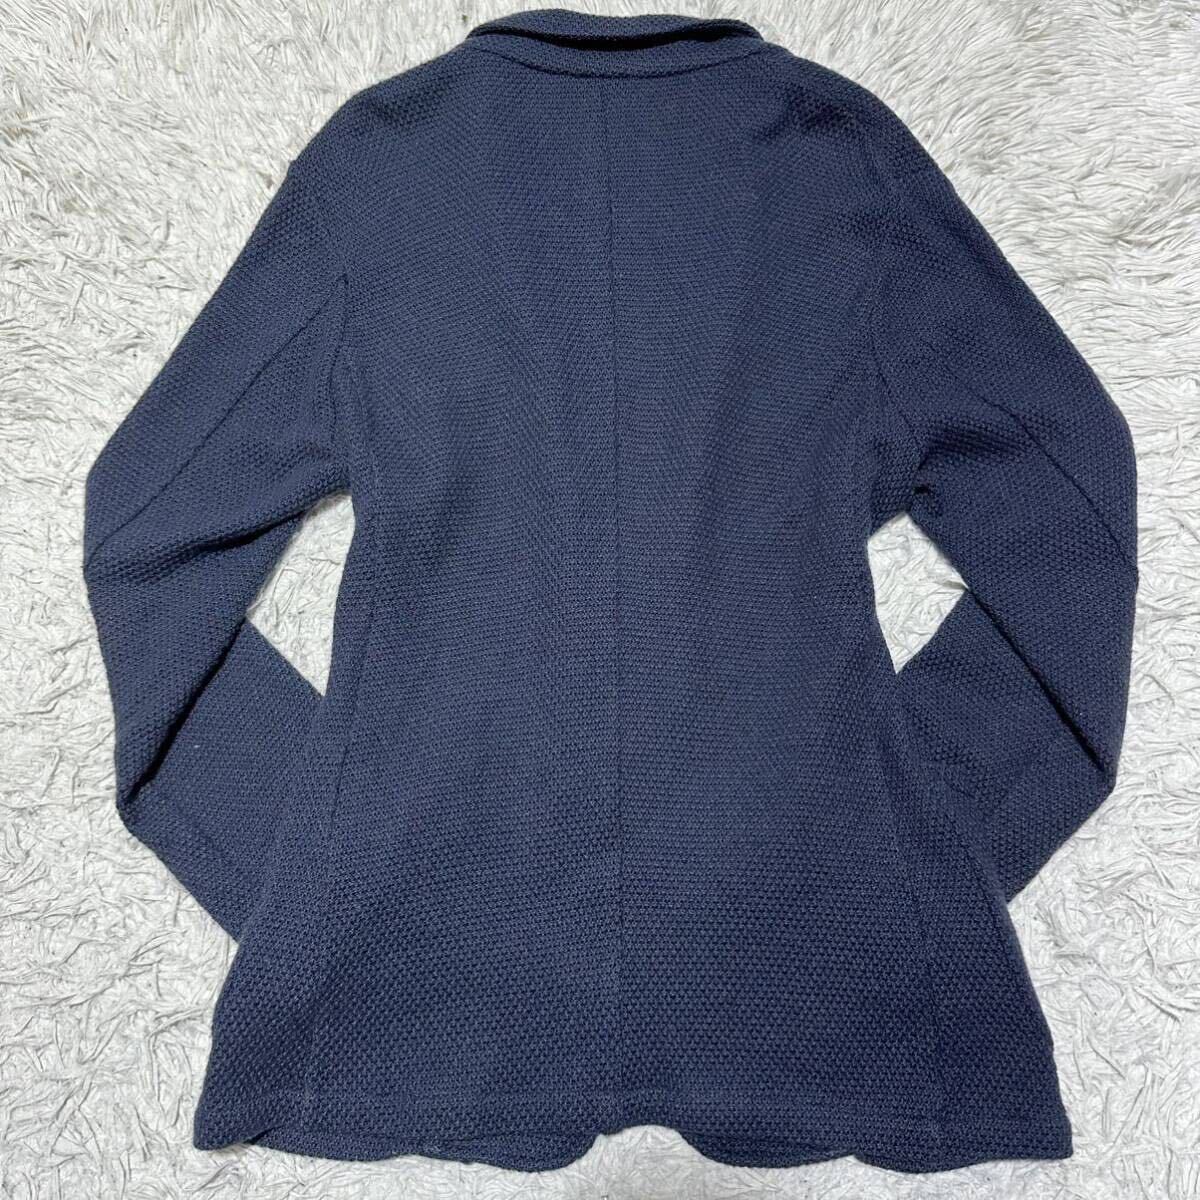  elasticity * ultimate beautiful goods!!![UNITED ARROWS United Arrows ] tailored jacket Anne navy blue navy dark blue stretch spring summer knitted 2B